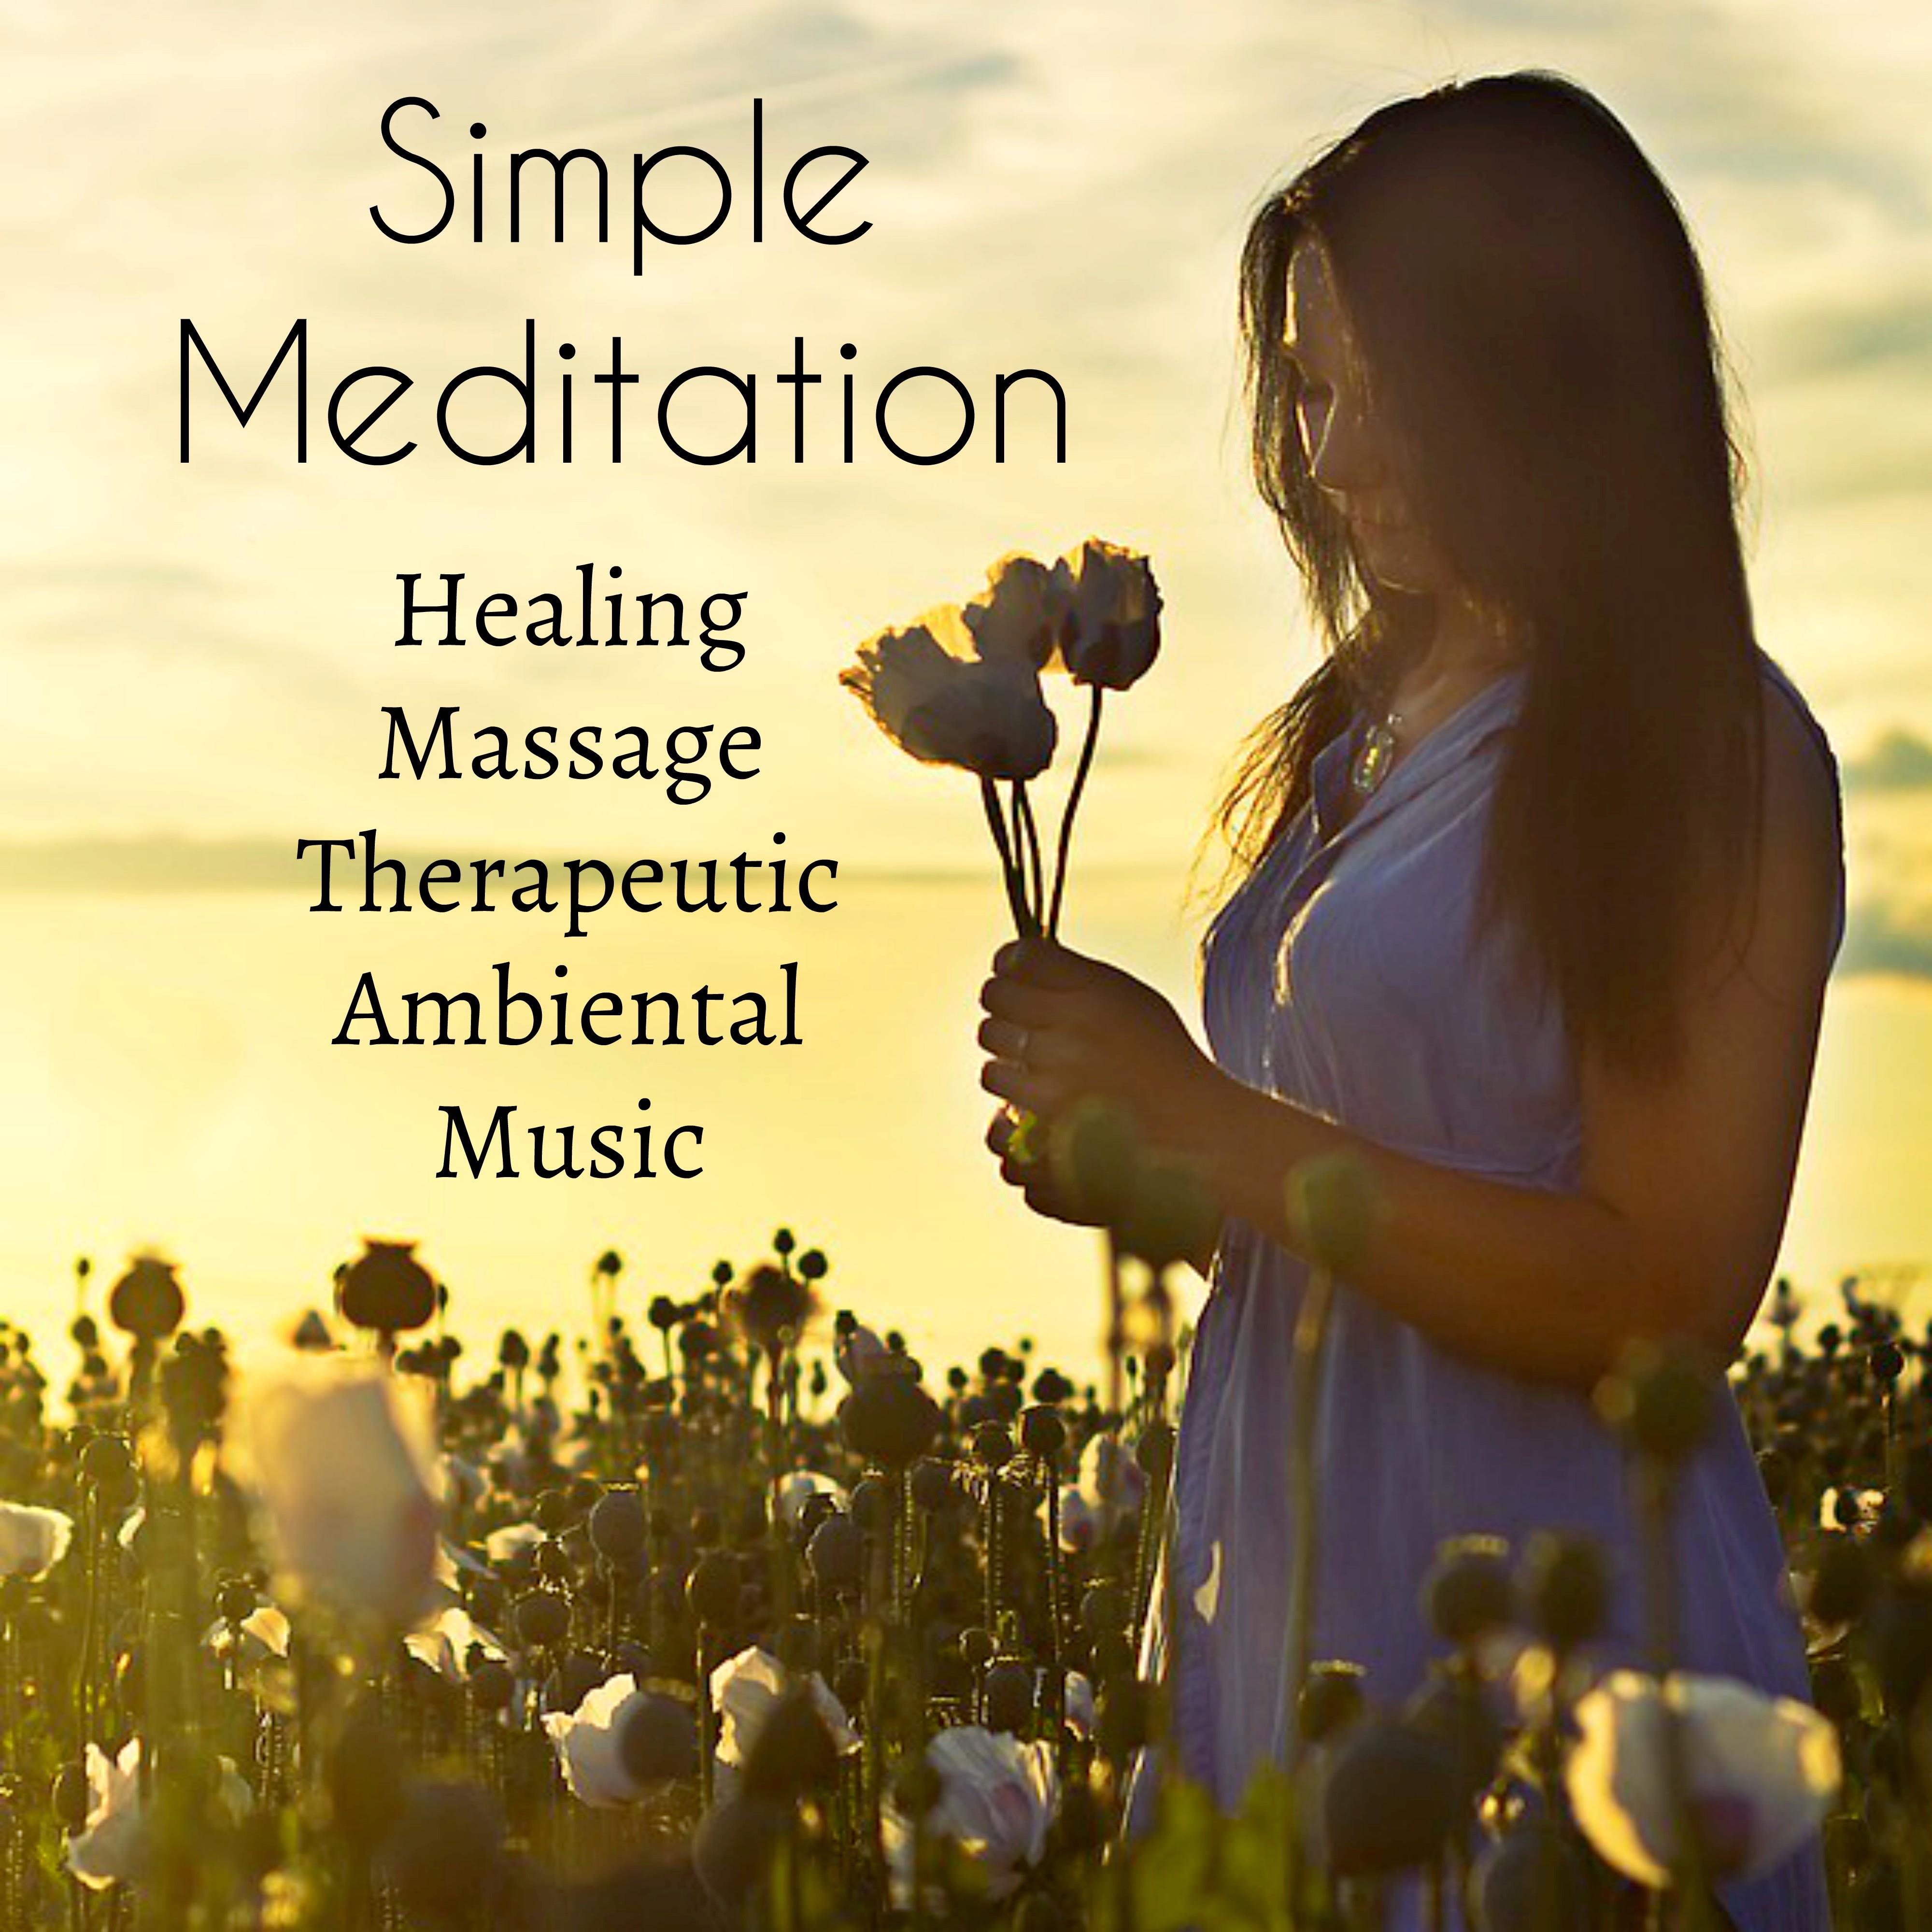 Simple Meditation - Healing Massage Therapeutic Ambiental Music for Mindfulness Therapy Deep Relaxation with New Age Nature Instrumental Sounds